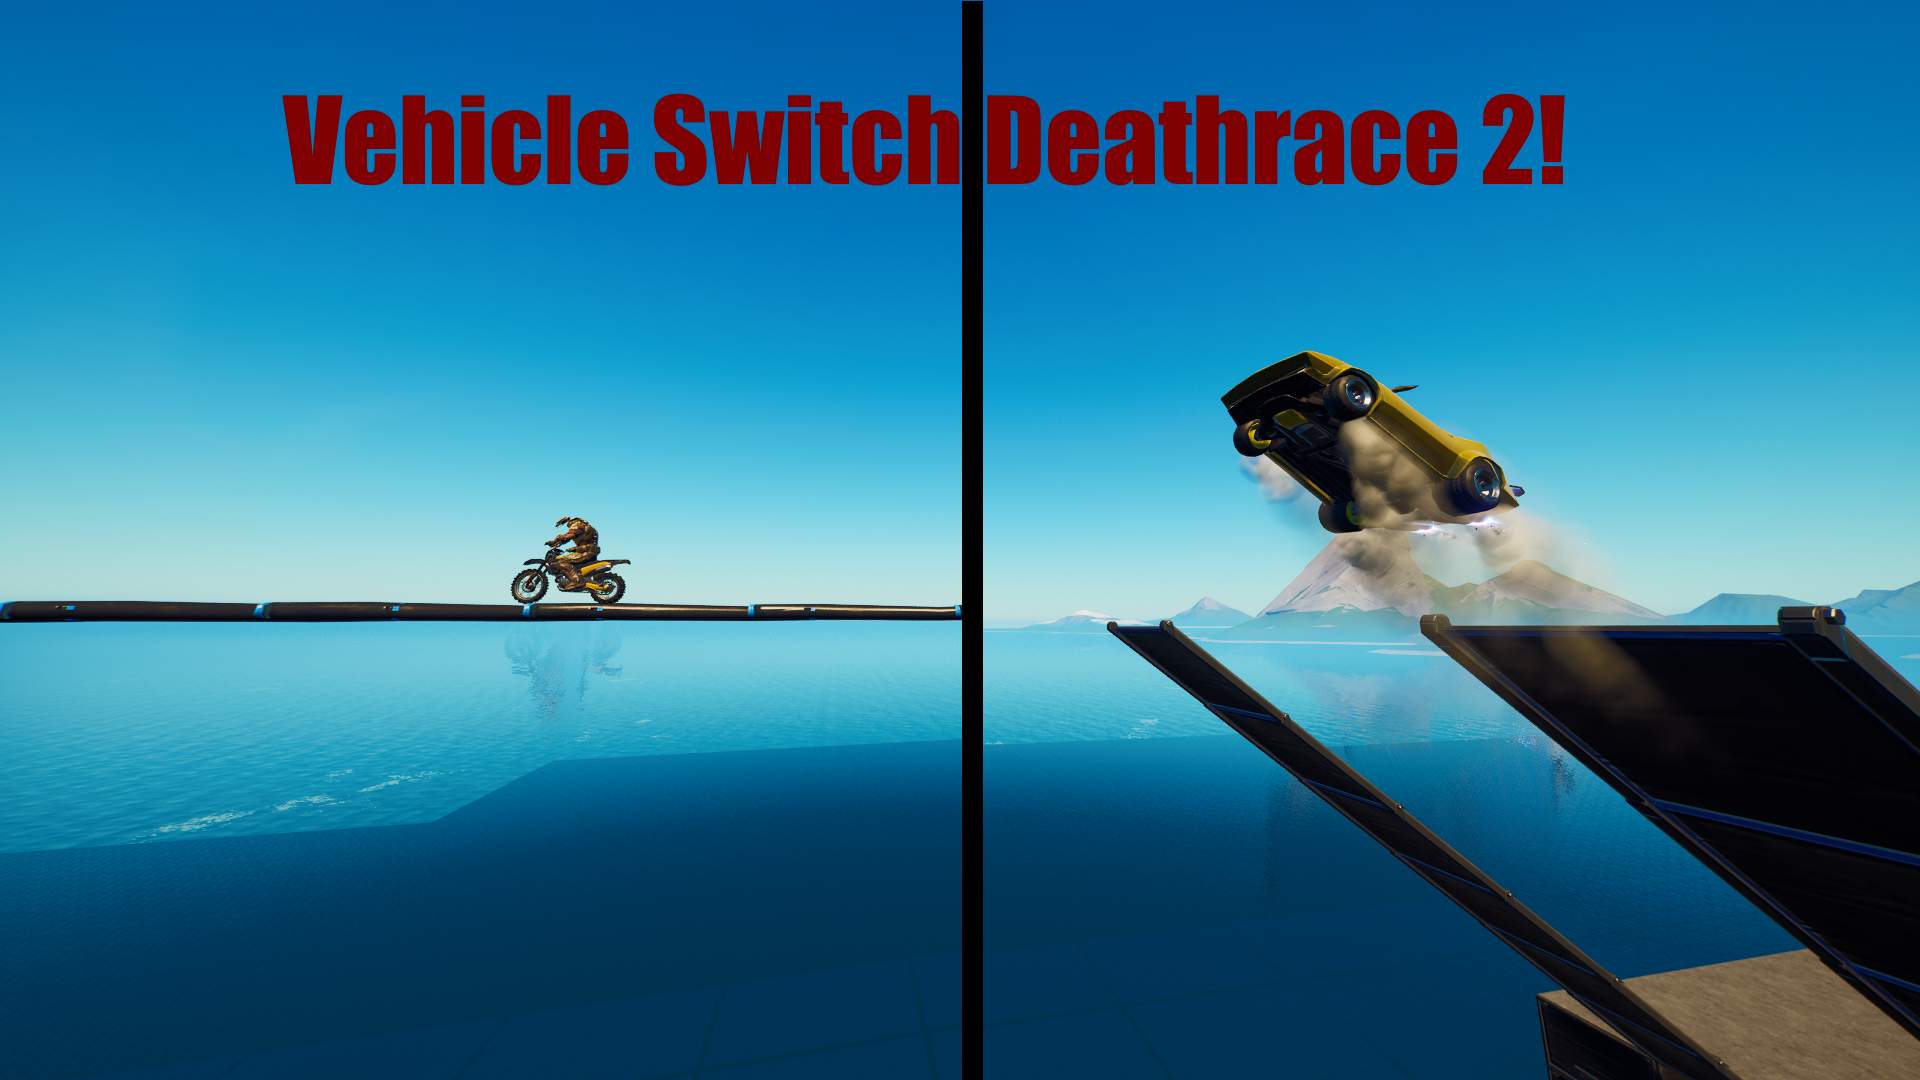 Vehicle Switch Deathrace 2.0